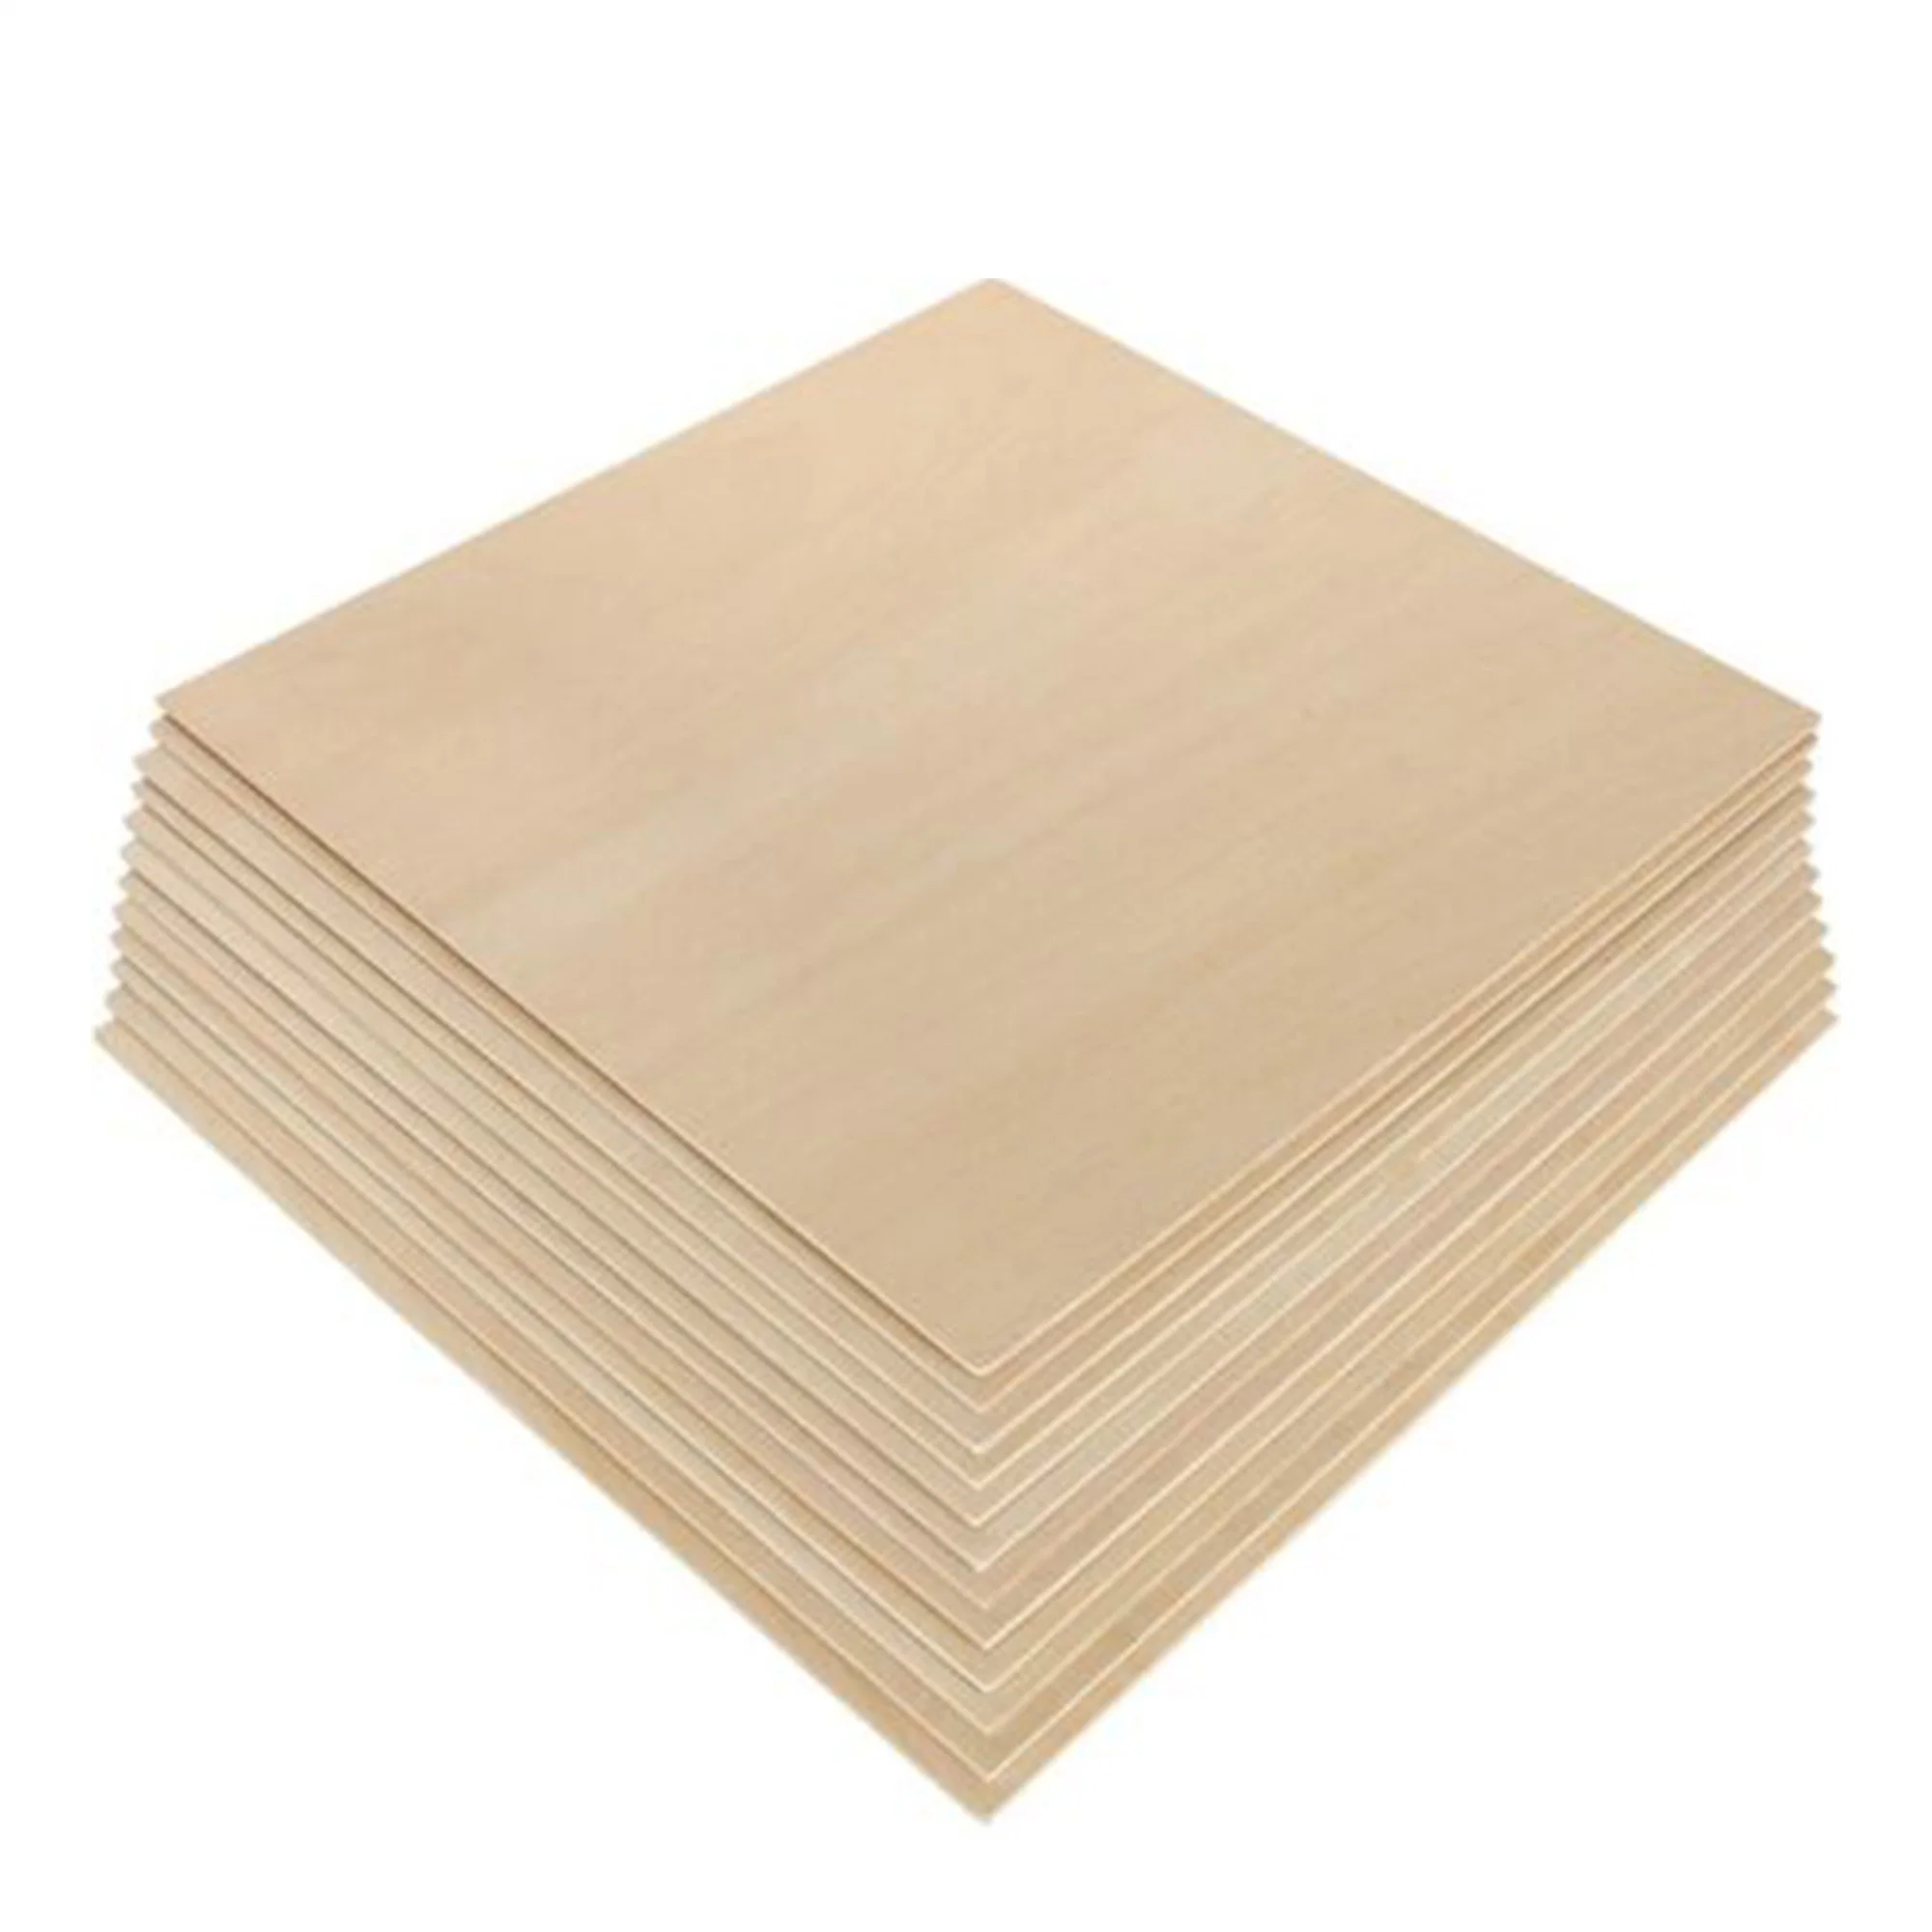 Factory Custom Wood Wooden Plywood Product for School Crafts DIY Art Project Painting Decorate